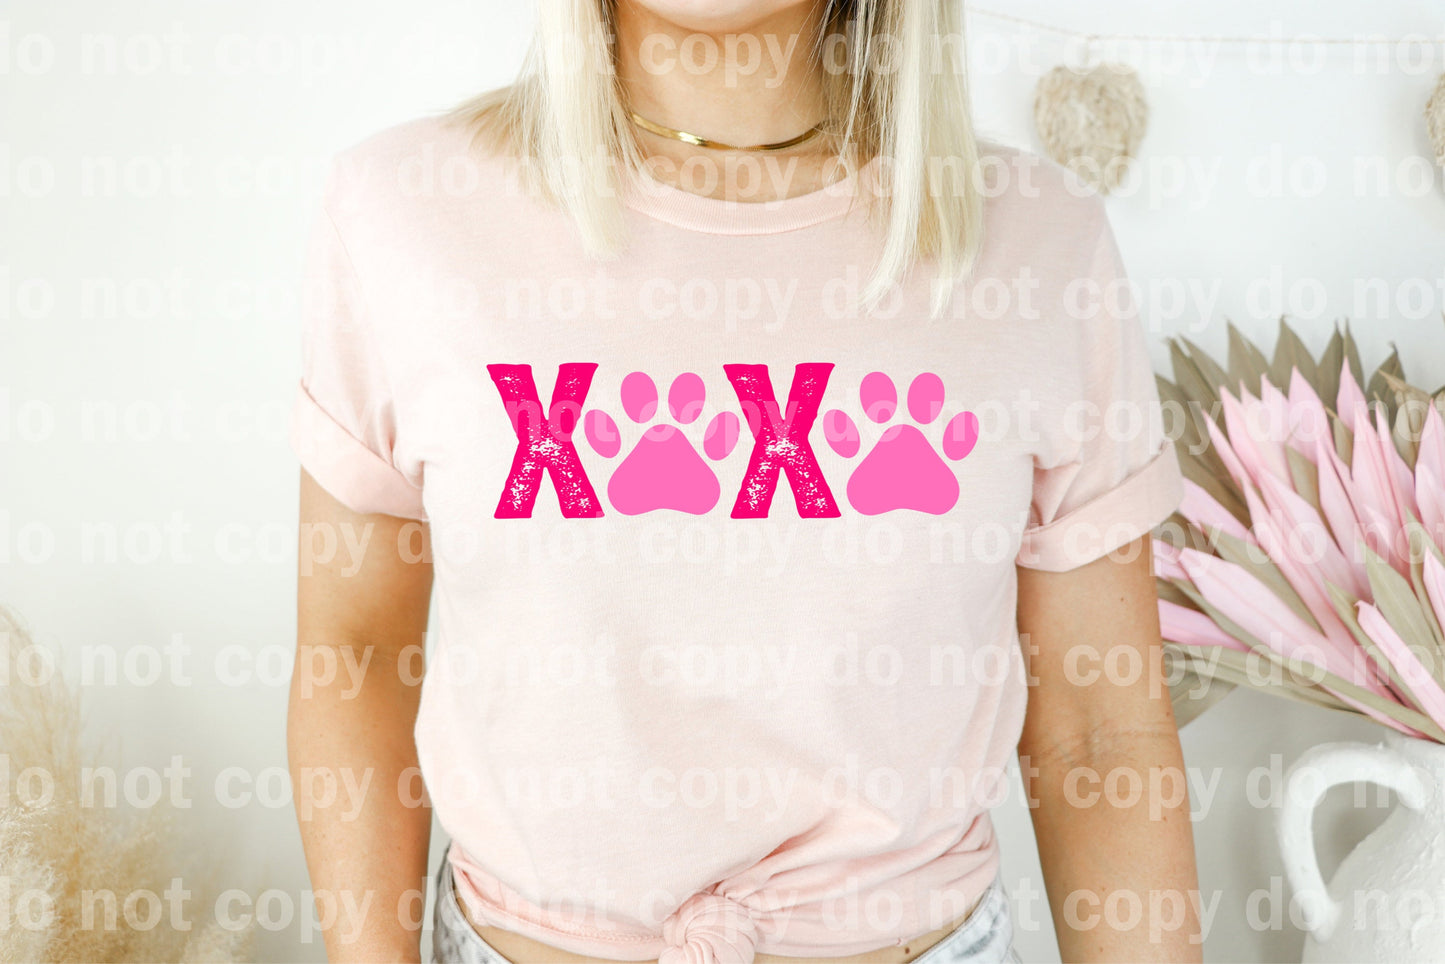 Xoxo Paws Full Color/One Color Dream Print or Sublimation Print